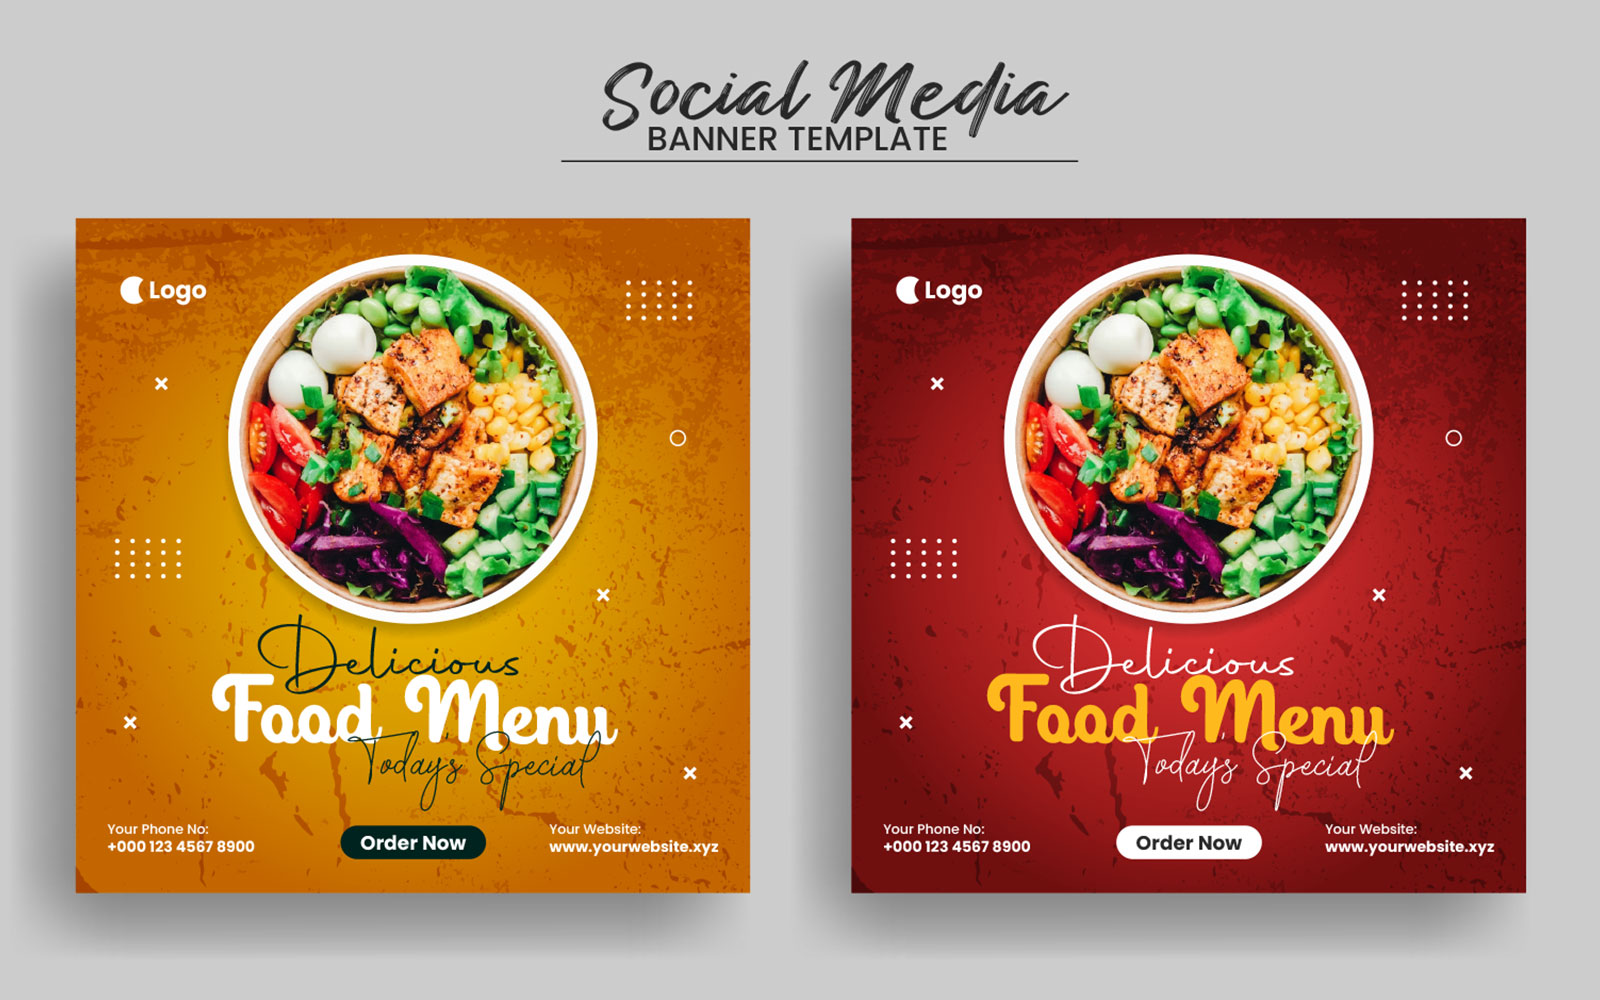 Delicious Food Menu Social Media Post Banner Template and Square Banner Layout